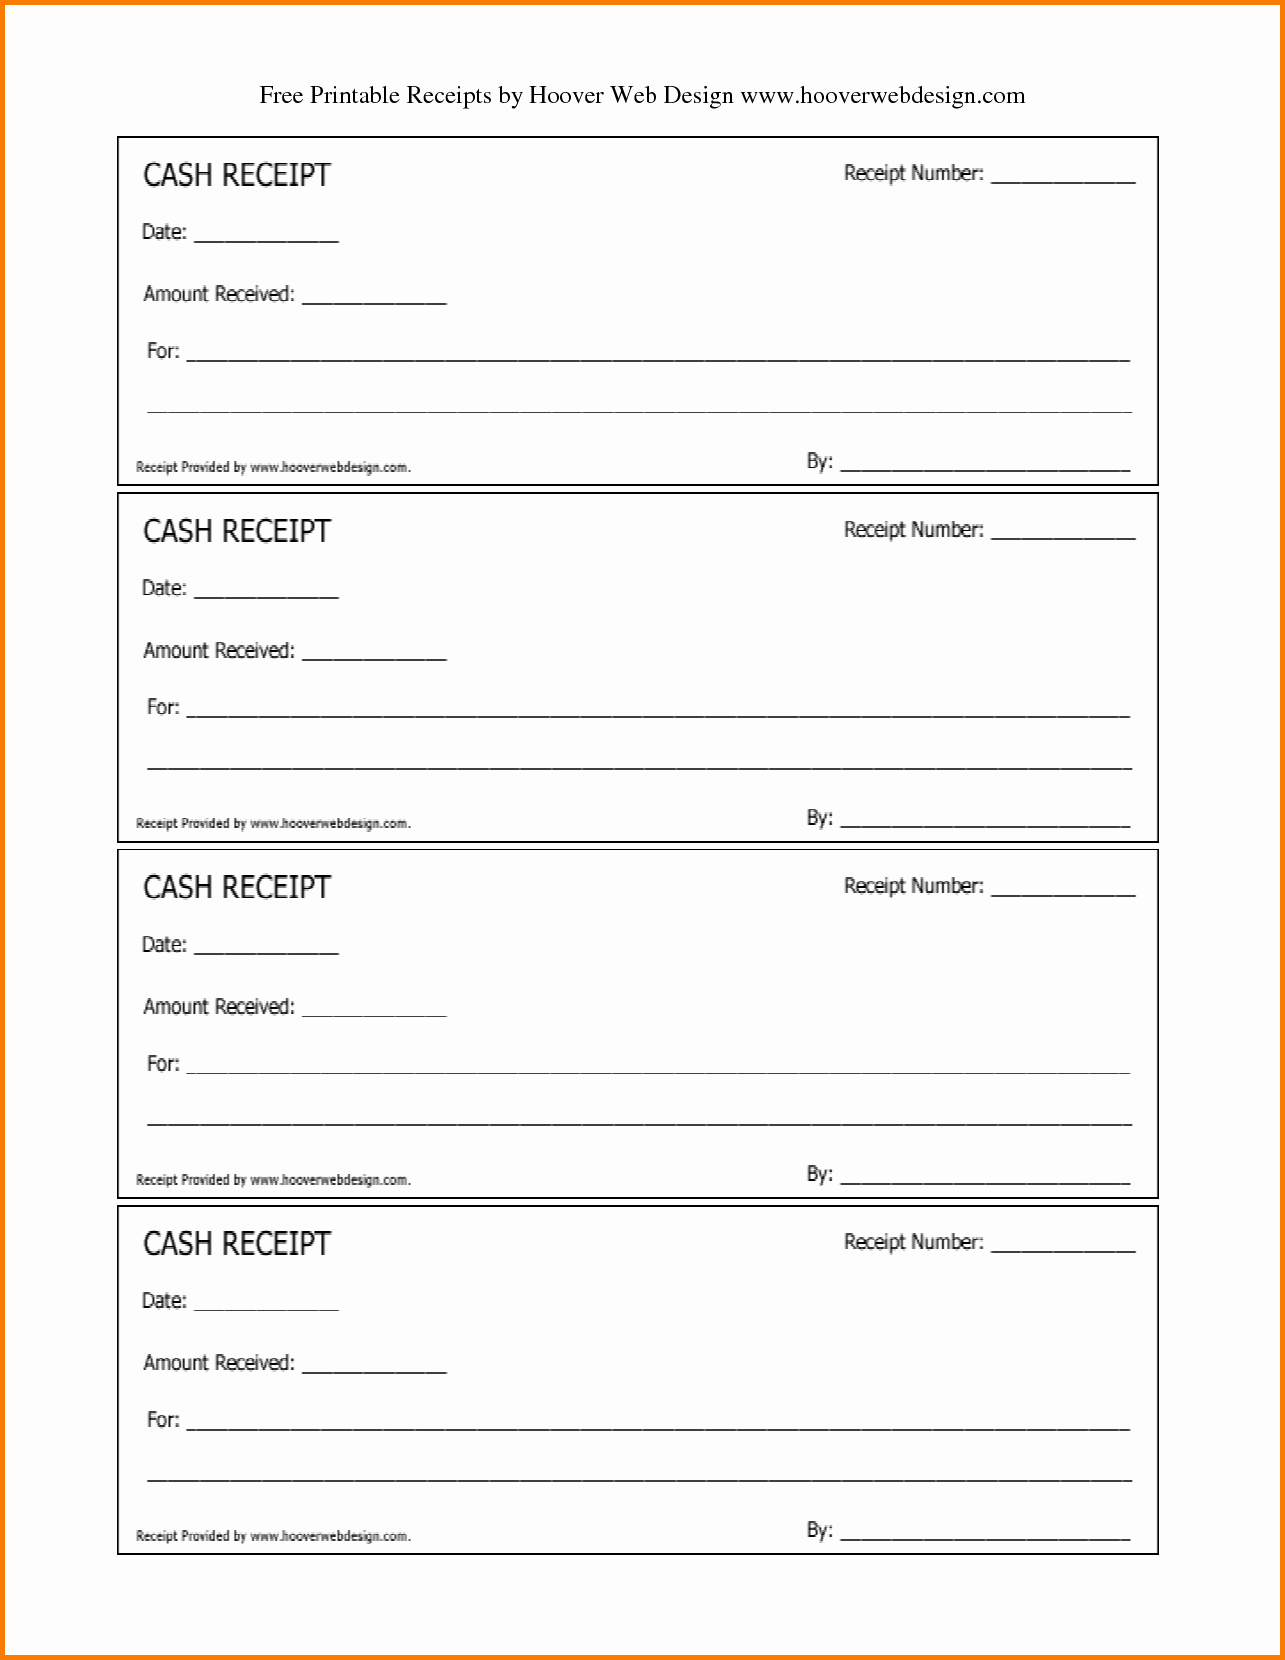 Free Invoice Receipt Template Unique Blank Receipt form Example Mughals